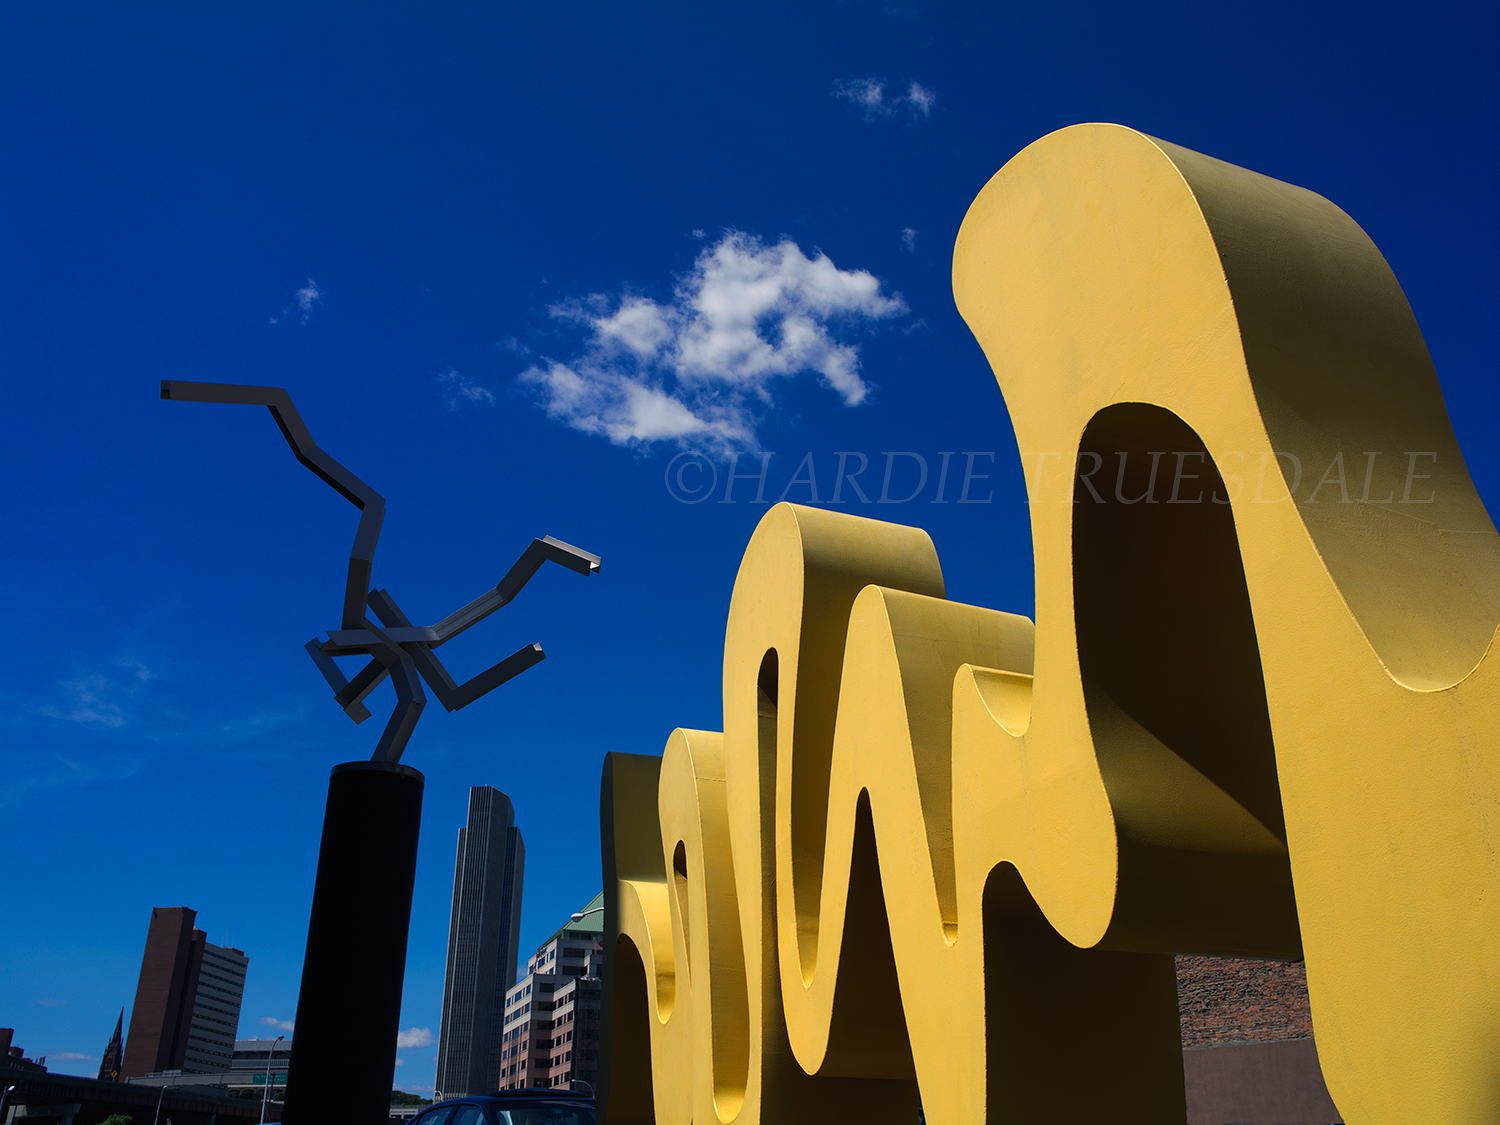 Alb#001 "Sculpture and Skyline", Albany